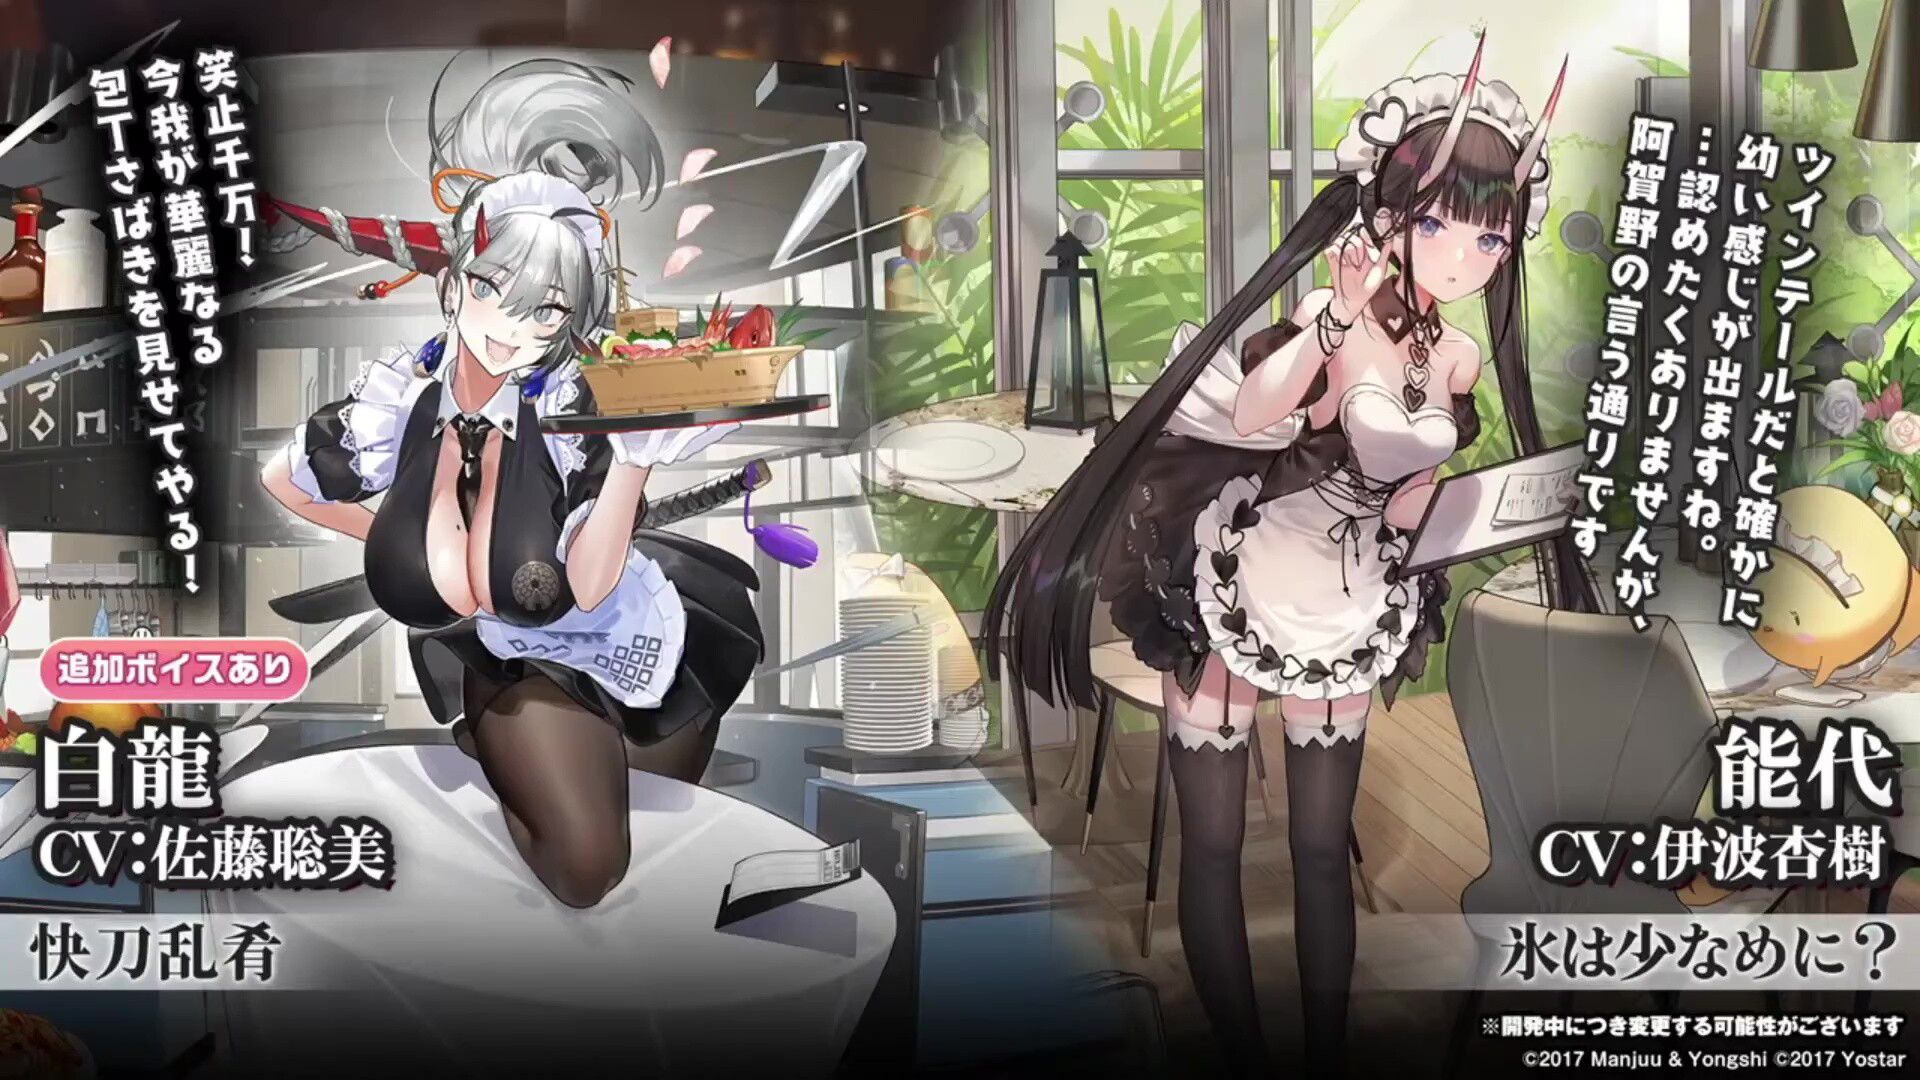 Erotic costumes such as "Azur Lane" erotic new character, whipmuchiro Santa and whipmuchi erotic maid clothes 24